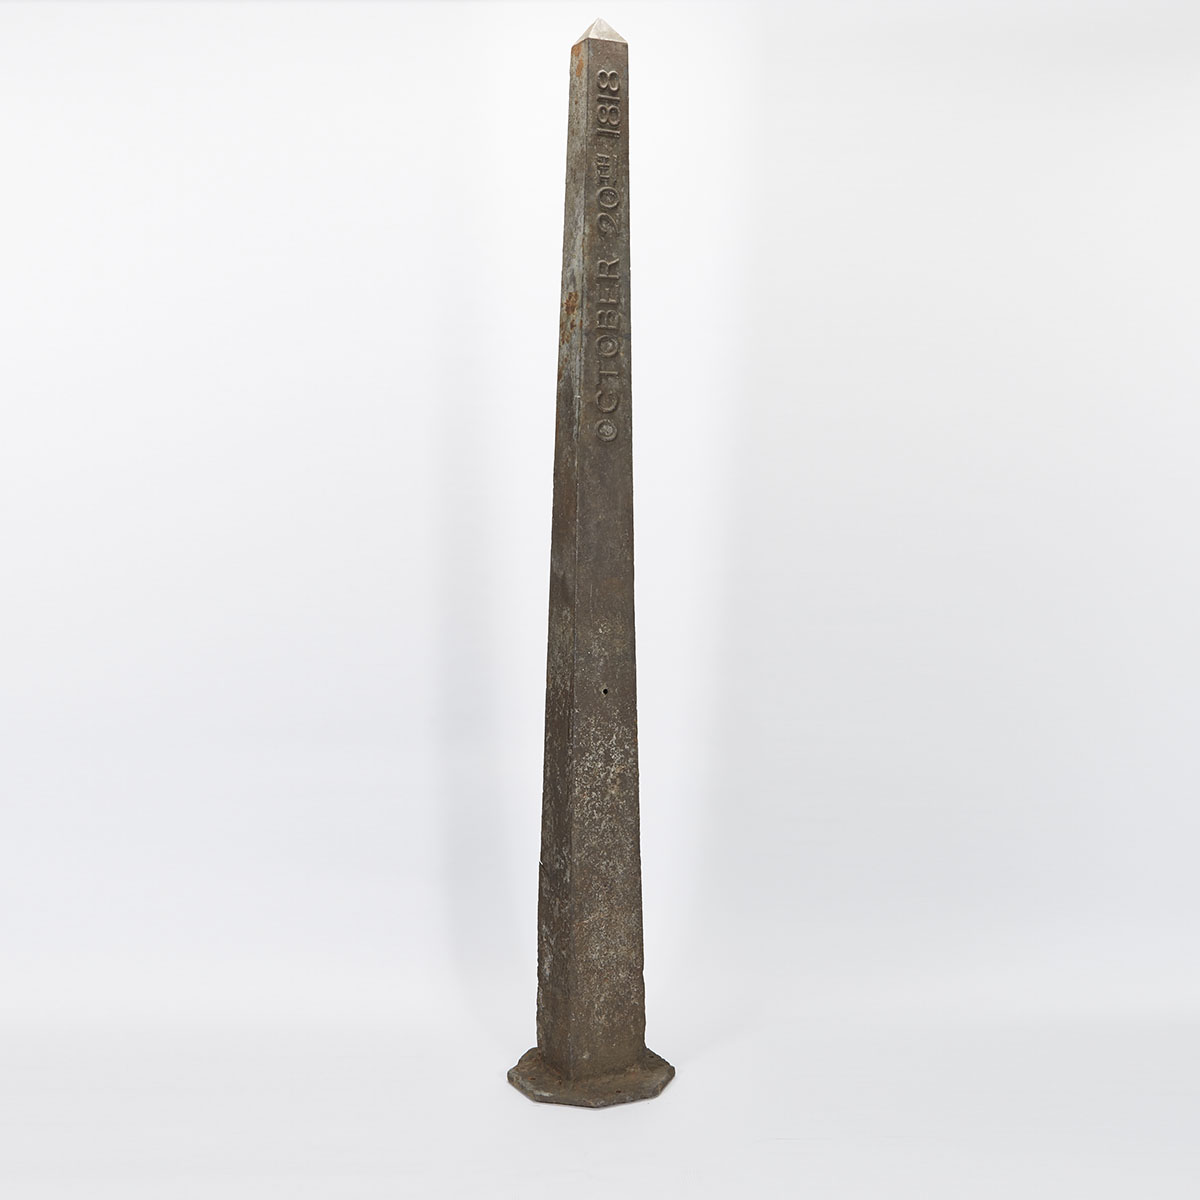 Convention of London, Canada-United States Cast Iron Obelisk Form Border Marker, 19th century